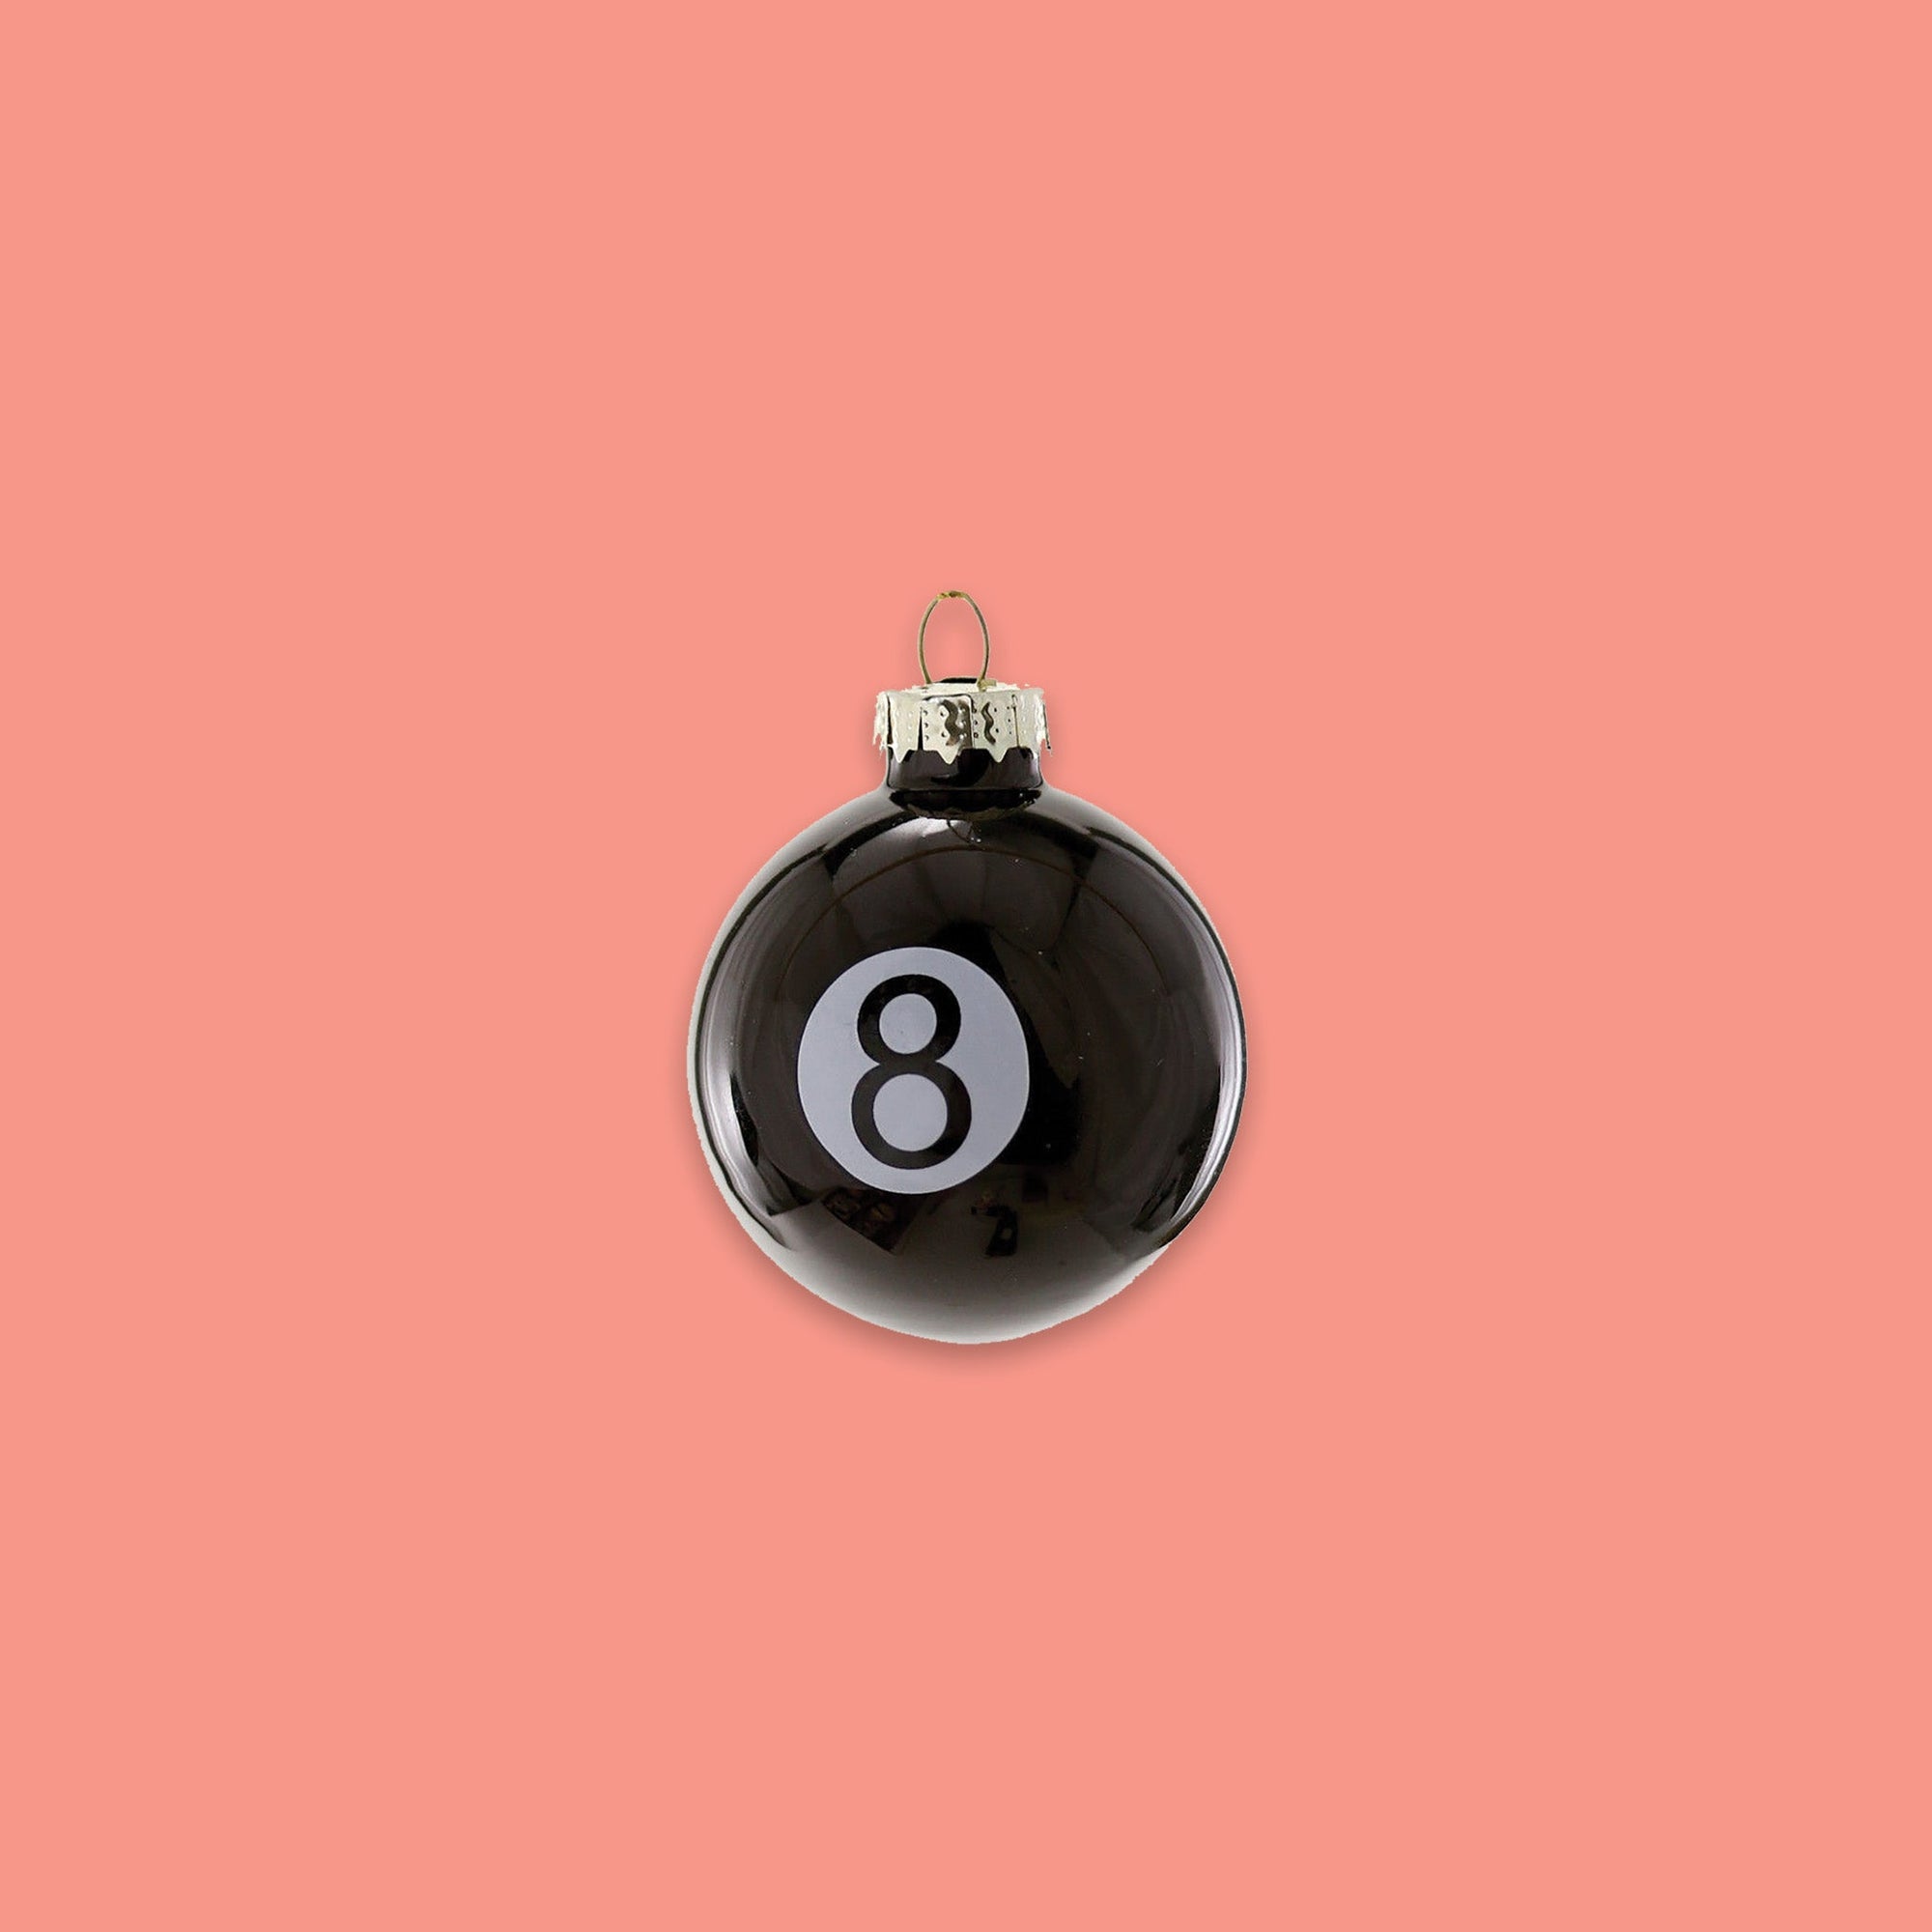 On a coral pink background sits a ball ornament. This is a glass 'Eight Ball' black ornament with a white dot and the number 8 on it in black.